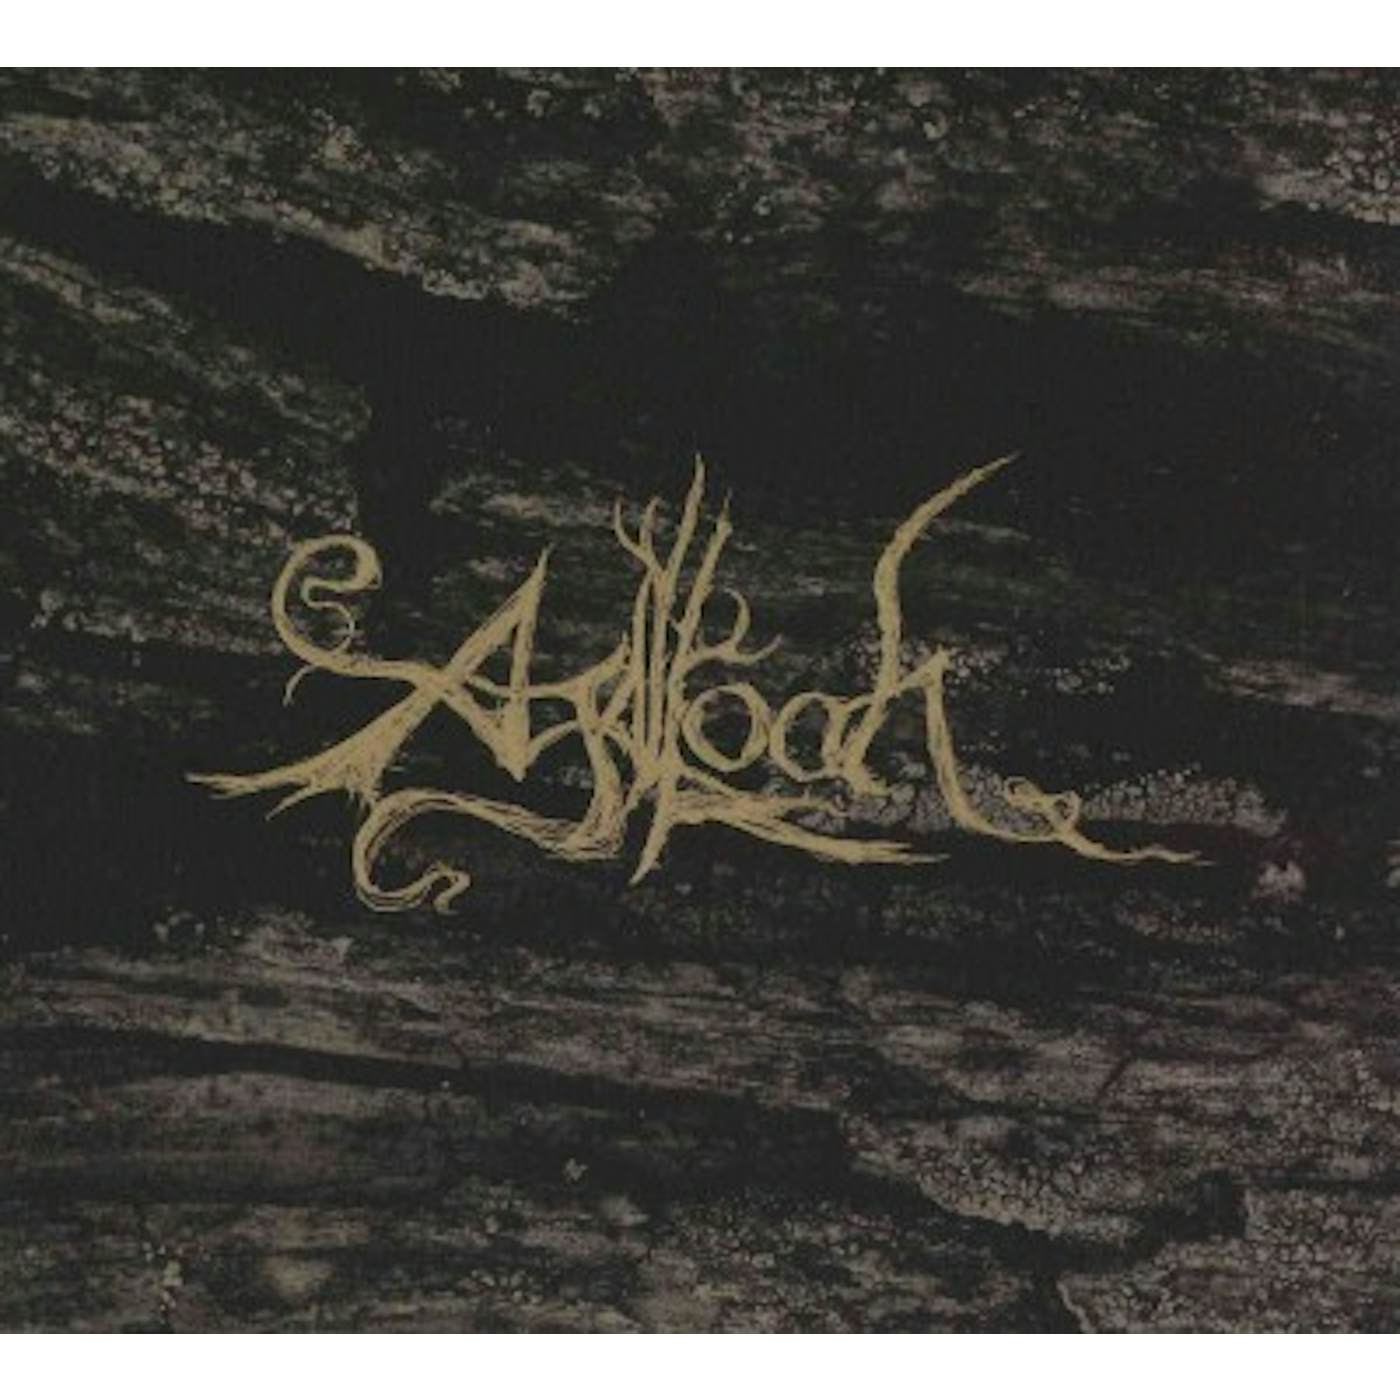 Agalloch PALE FOLKLORE (REMASTERED) CD